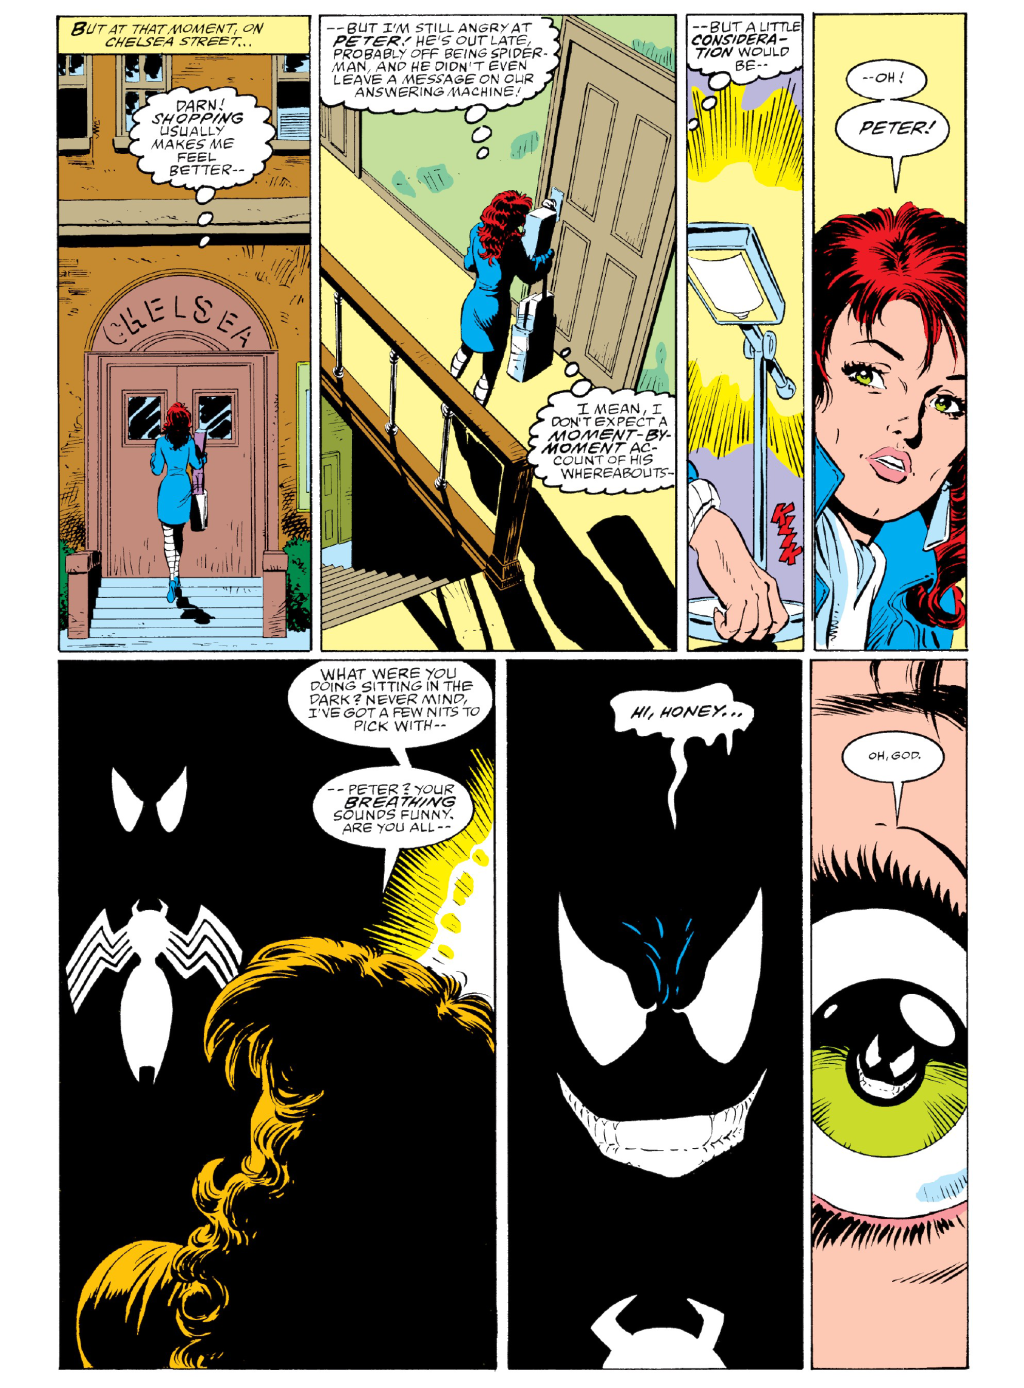 Mary-Jane receives a surprise Symbiote visitor in Amazing Spider-Man Vol. 1 #299 "Survival of the Hittist!" (1987), Marvel Comics. Words by David Michelinie, art by Todd McFarlane, Bob McLeod, Bob Sharen, and Rick Parker.